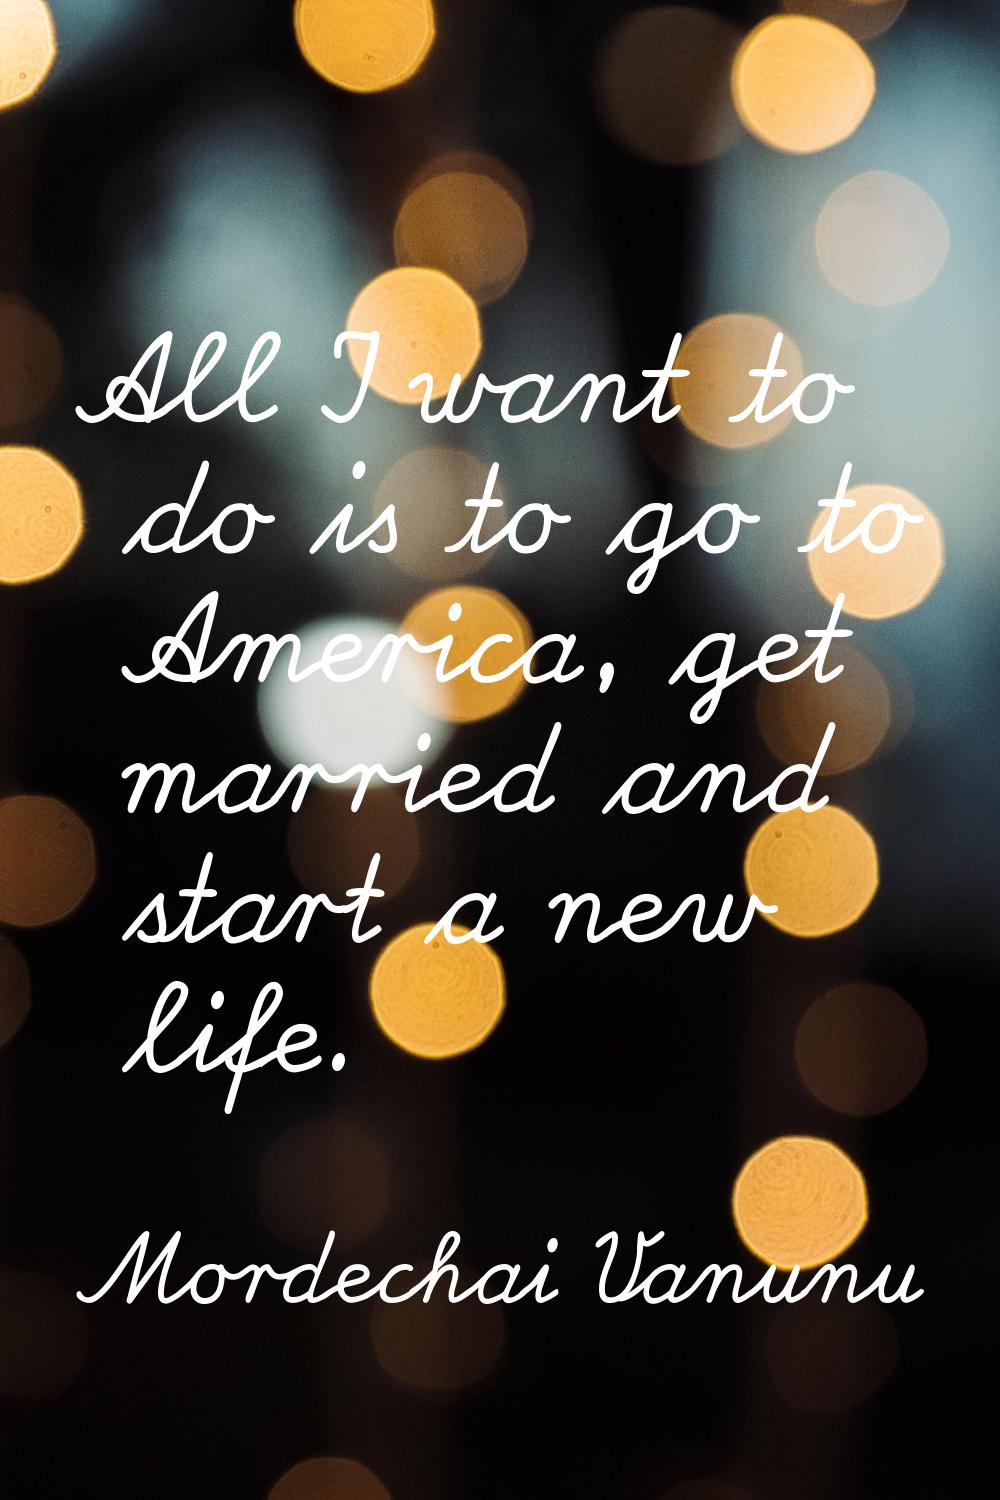 All I want to do is to go to America, get married and start a new life.